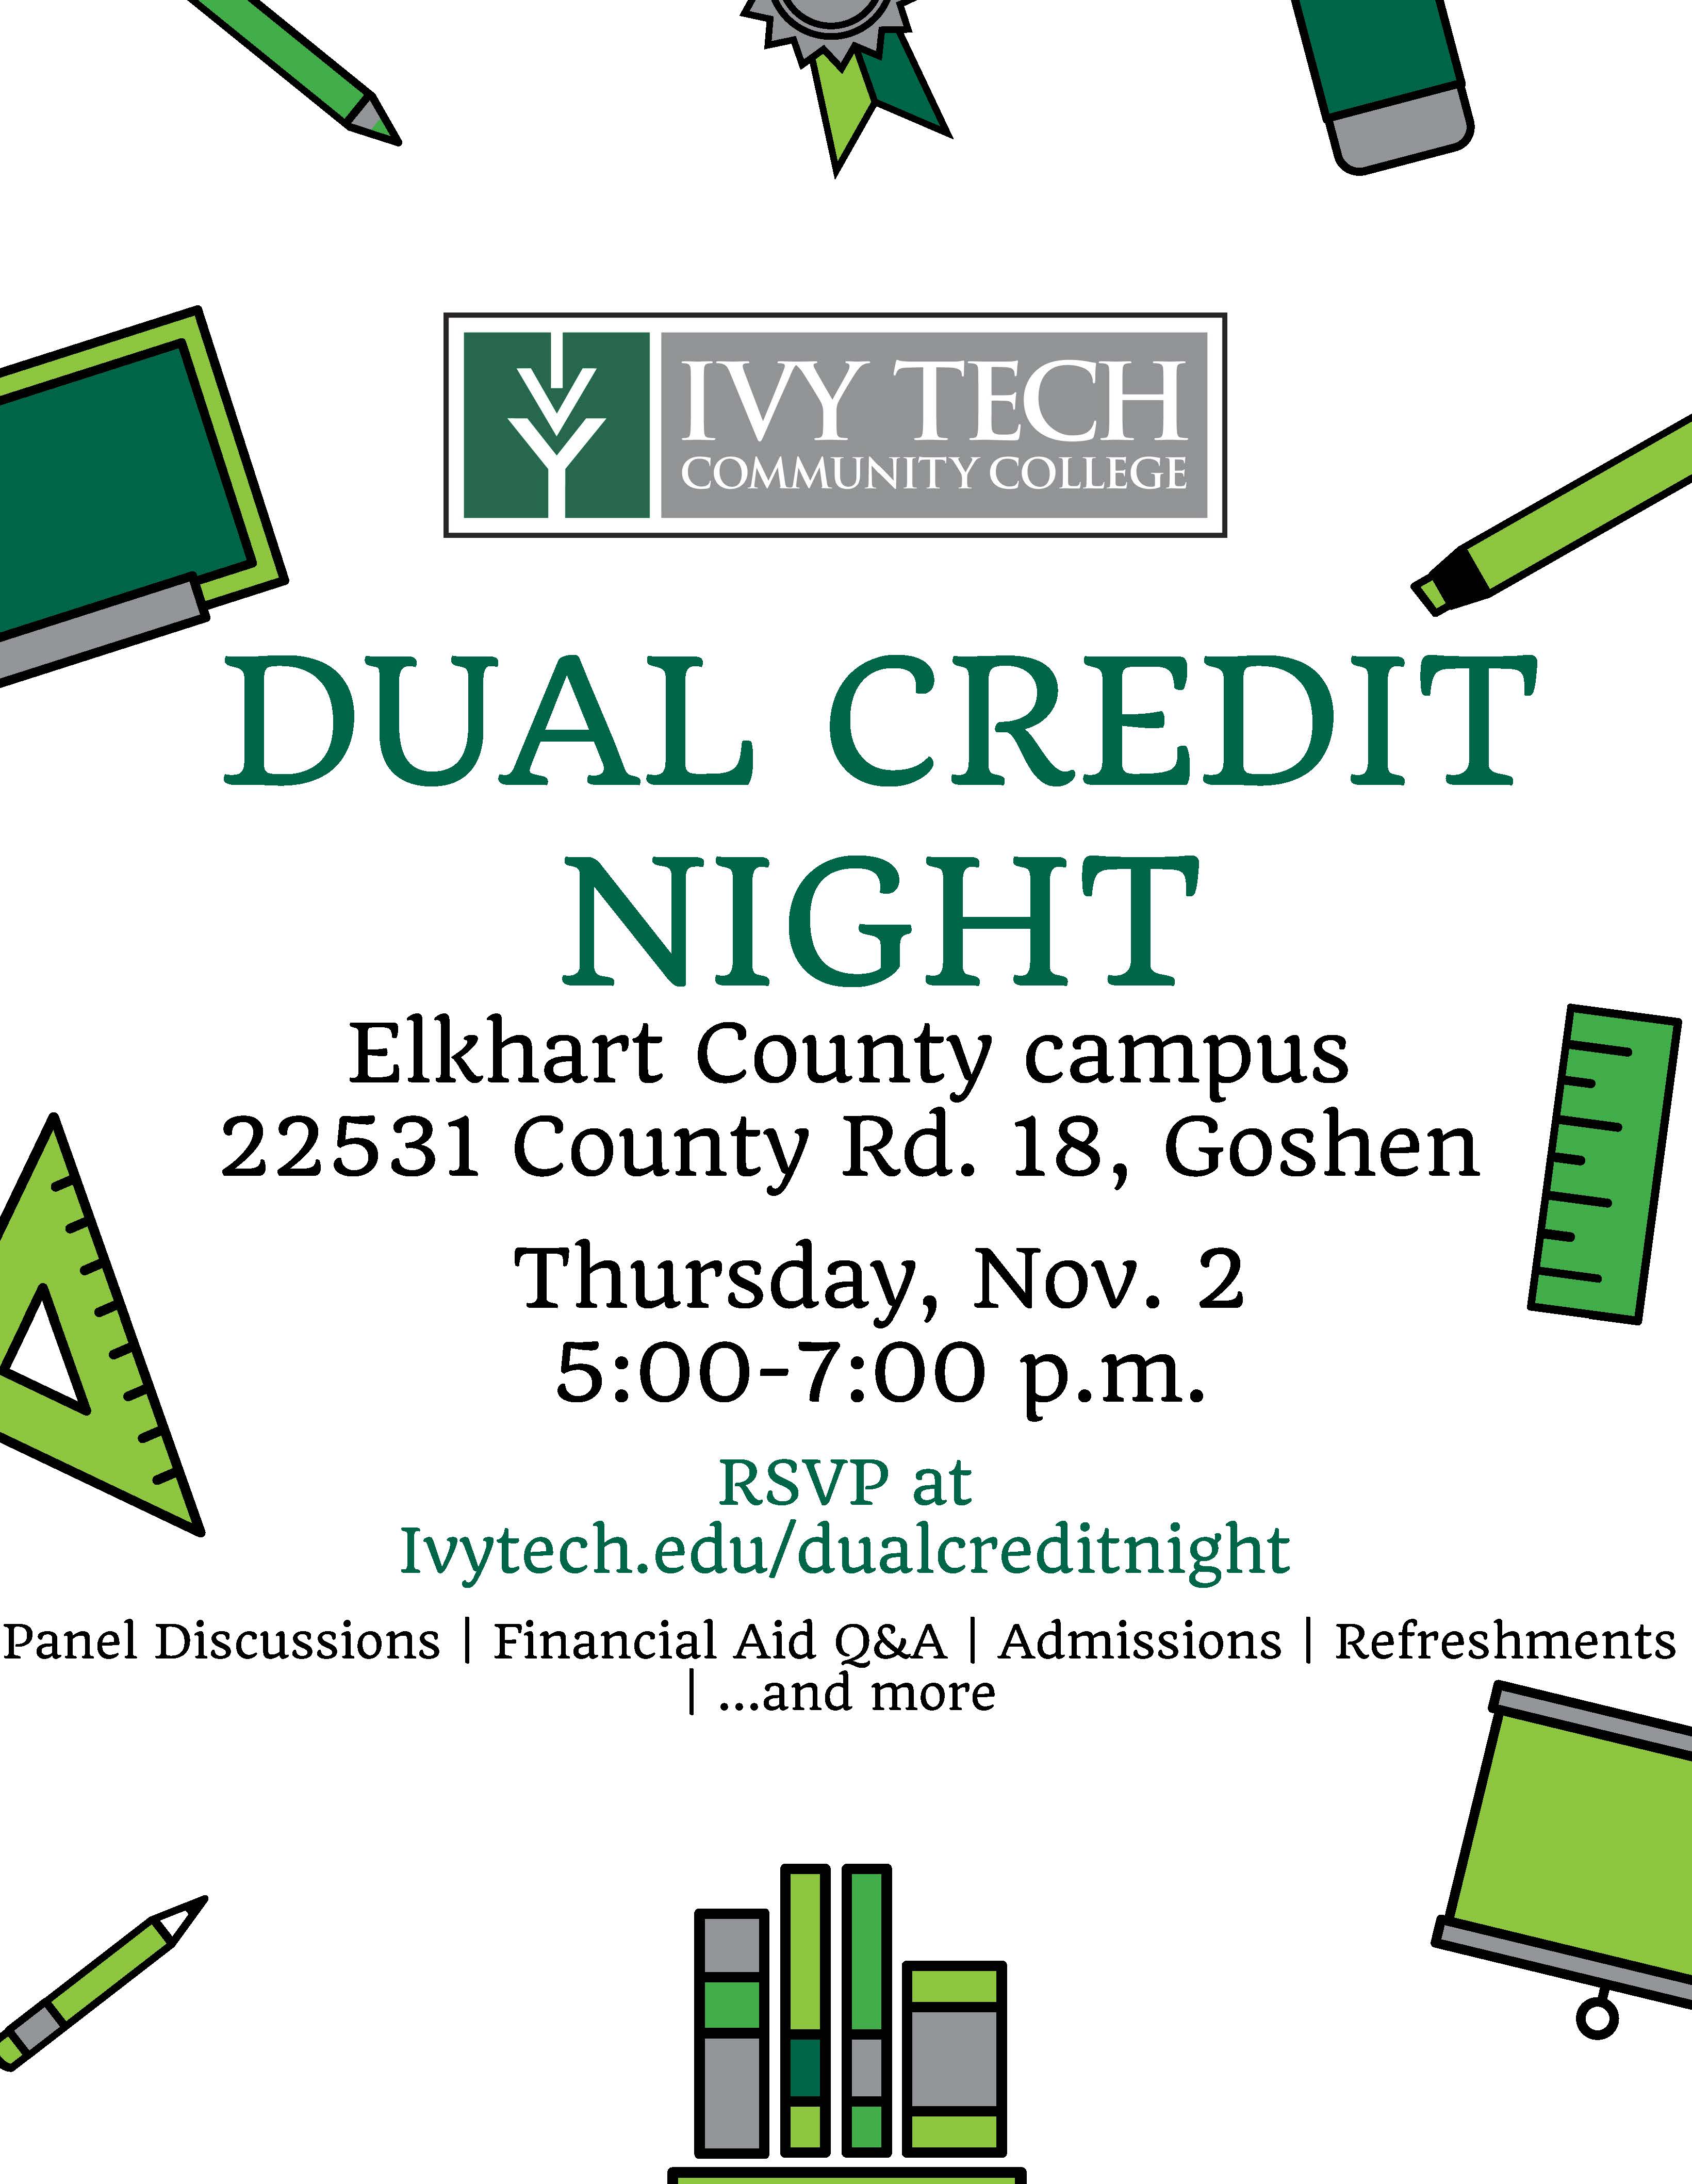 Ivy Tech Dual Credit Night on November 2, 2017 from 5:00-7:00 p.m.